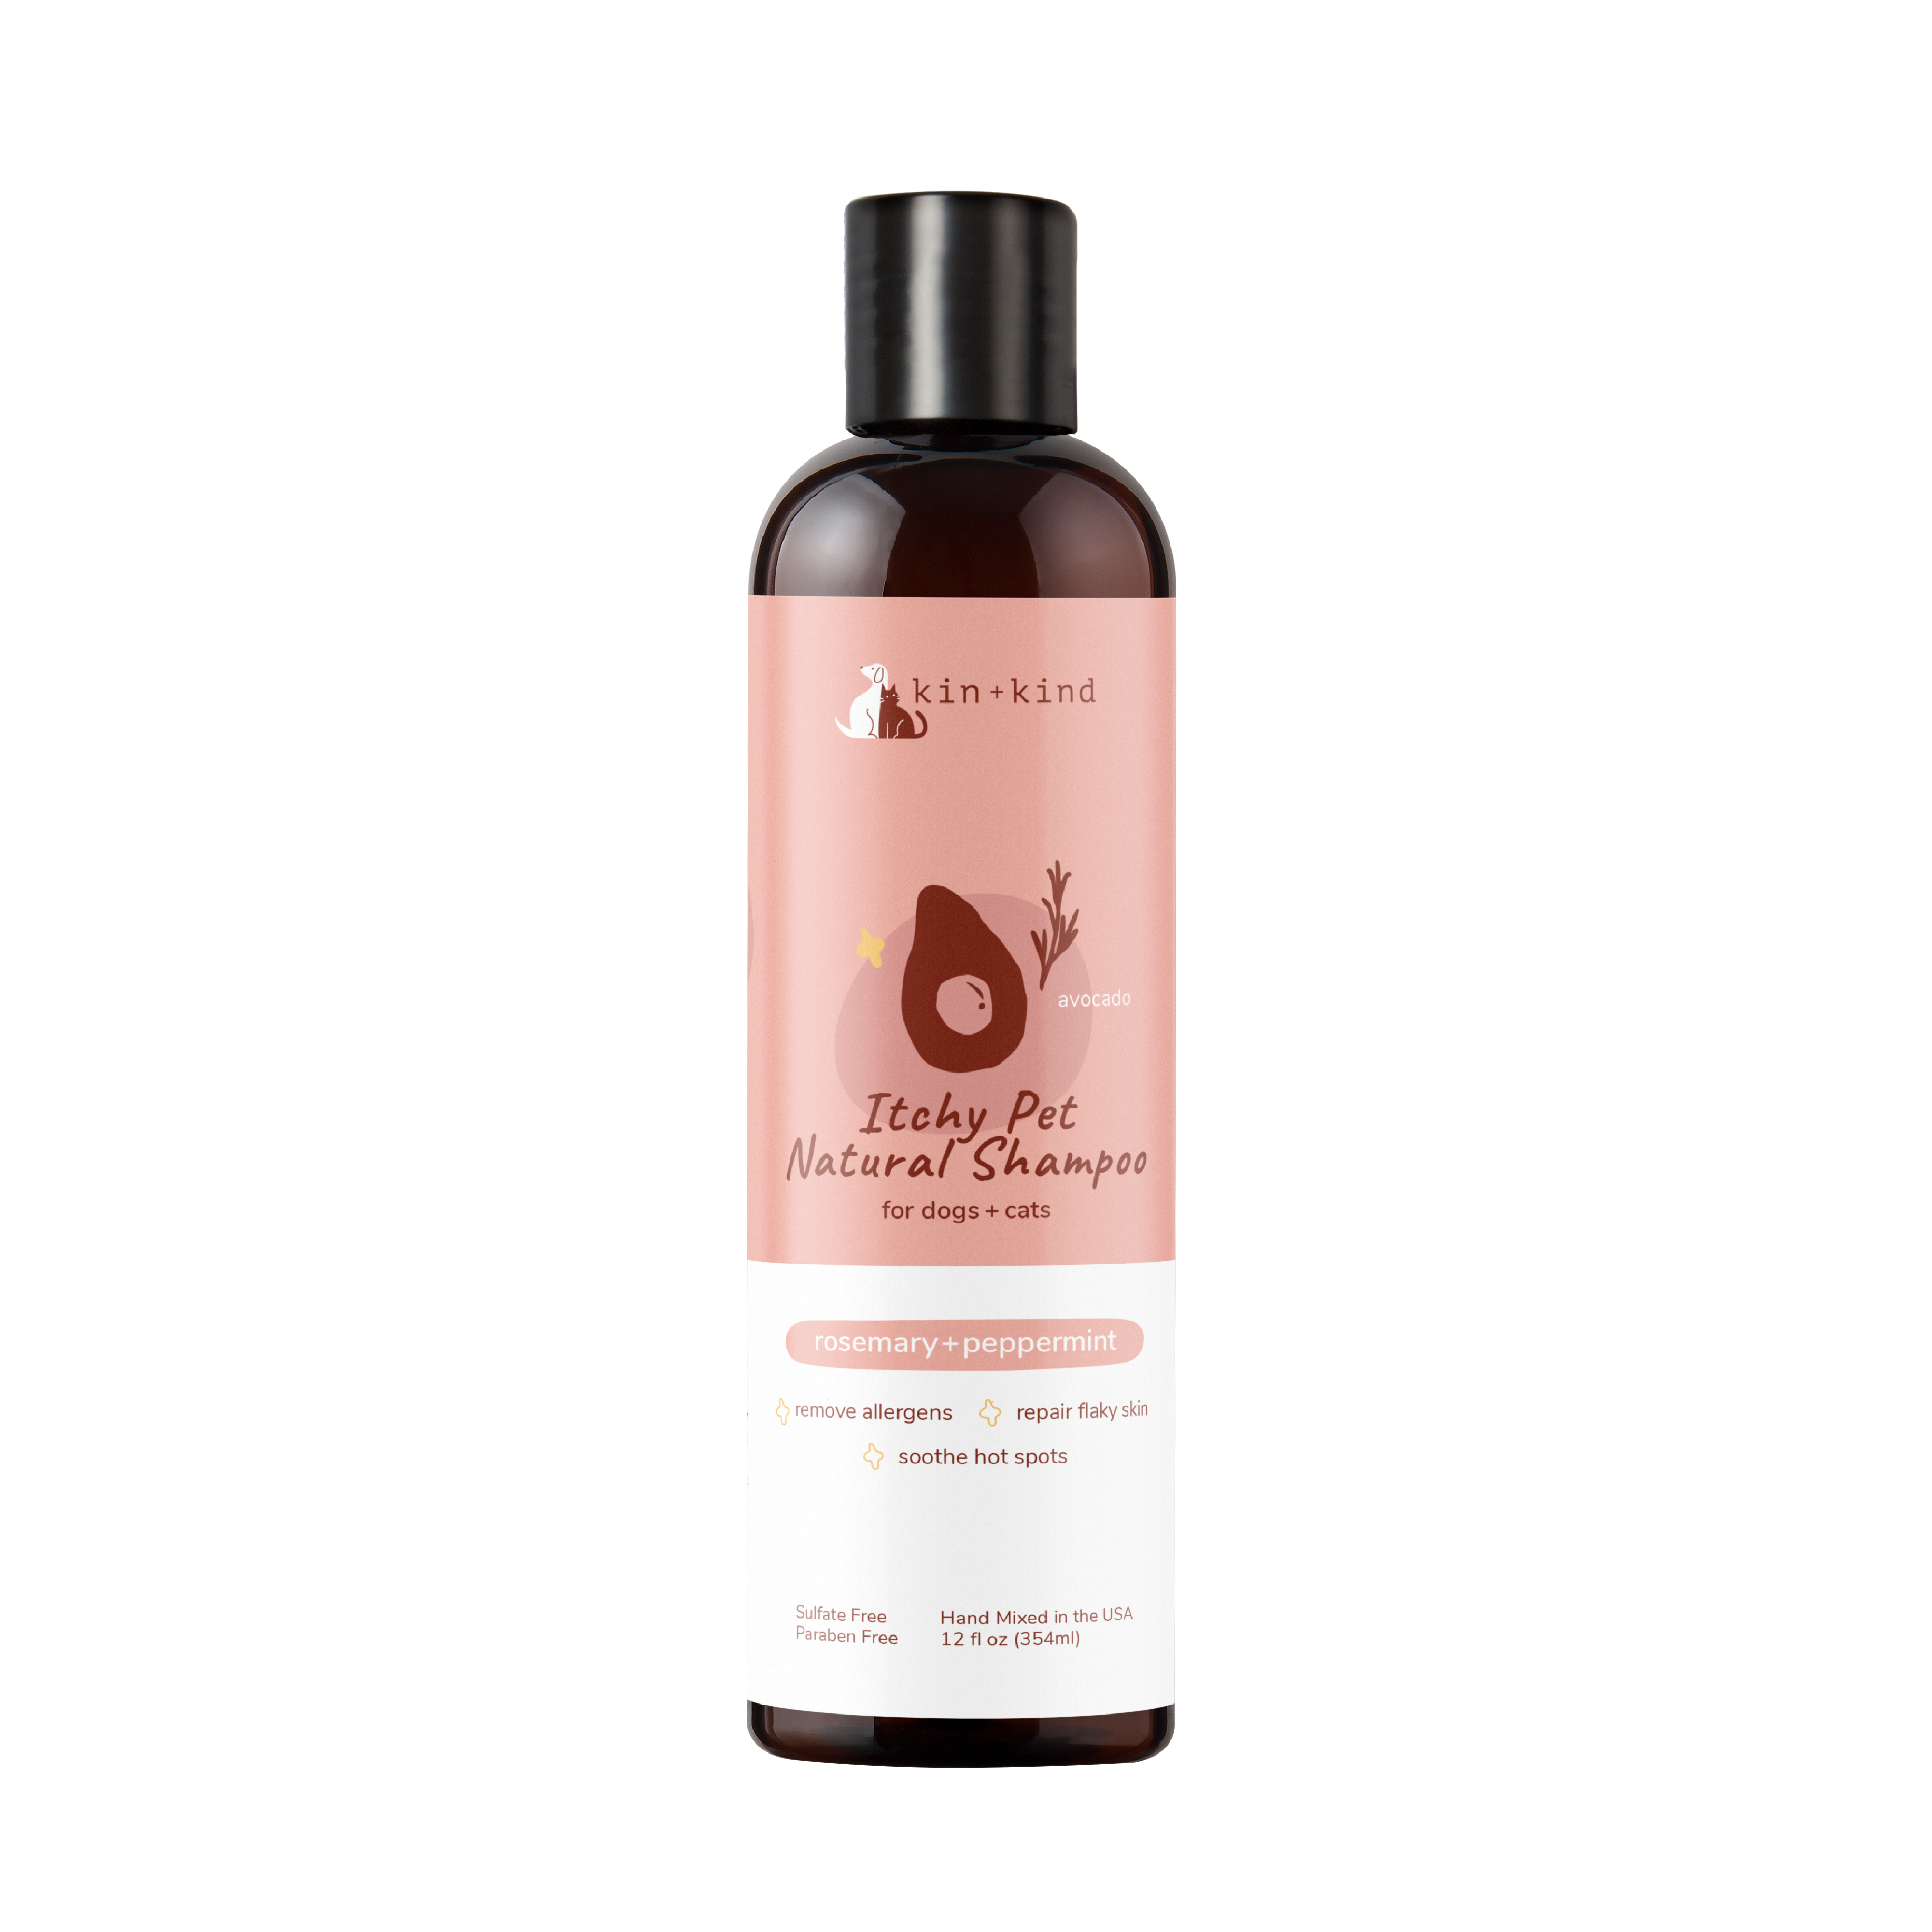 Kin+Kind Itchy Pet Natural Shampoo - Rosemary + Peppermint